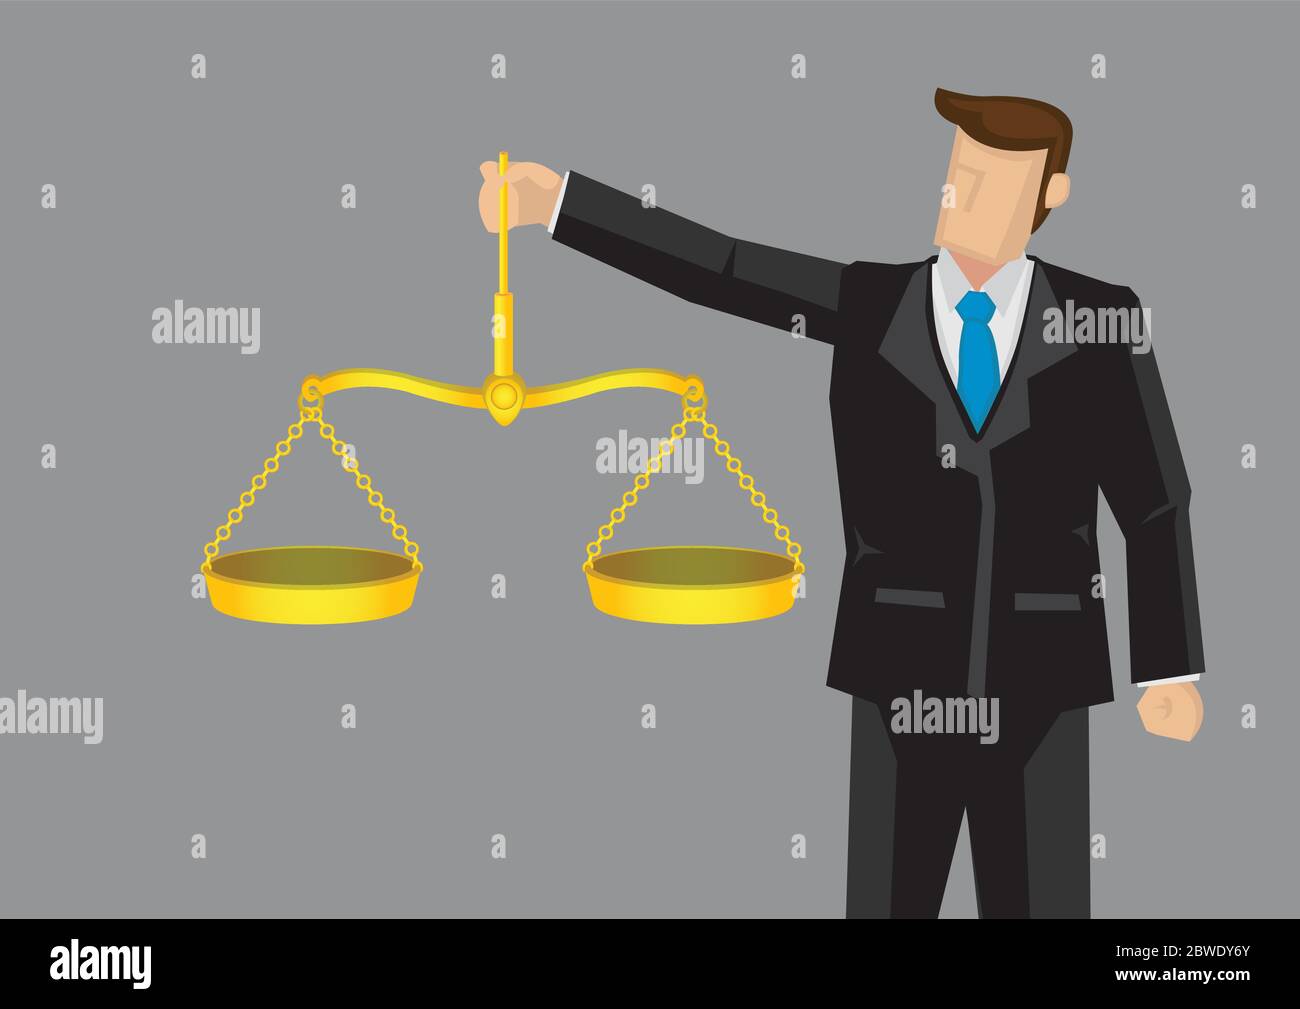 Cartoon man in formal suit holding golden balance scales, like Scales of Justice. Vector illustration for concept on upholding professional ethics iso Stock Vector